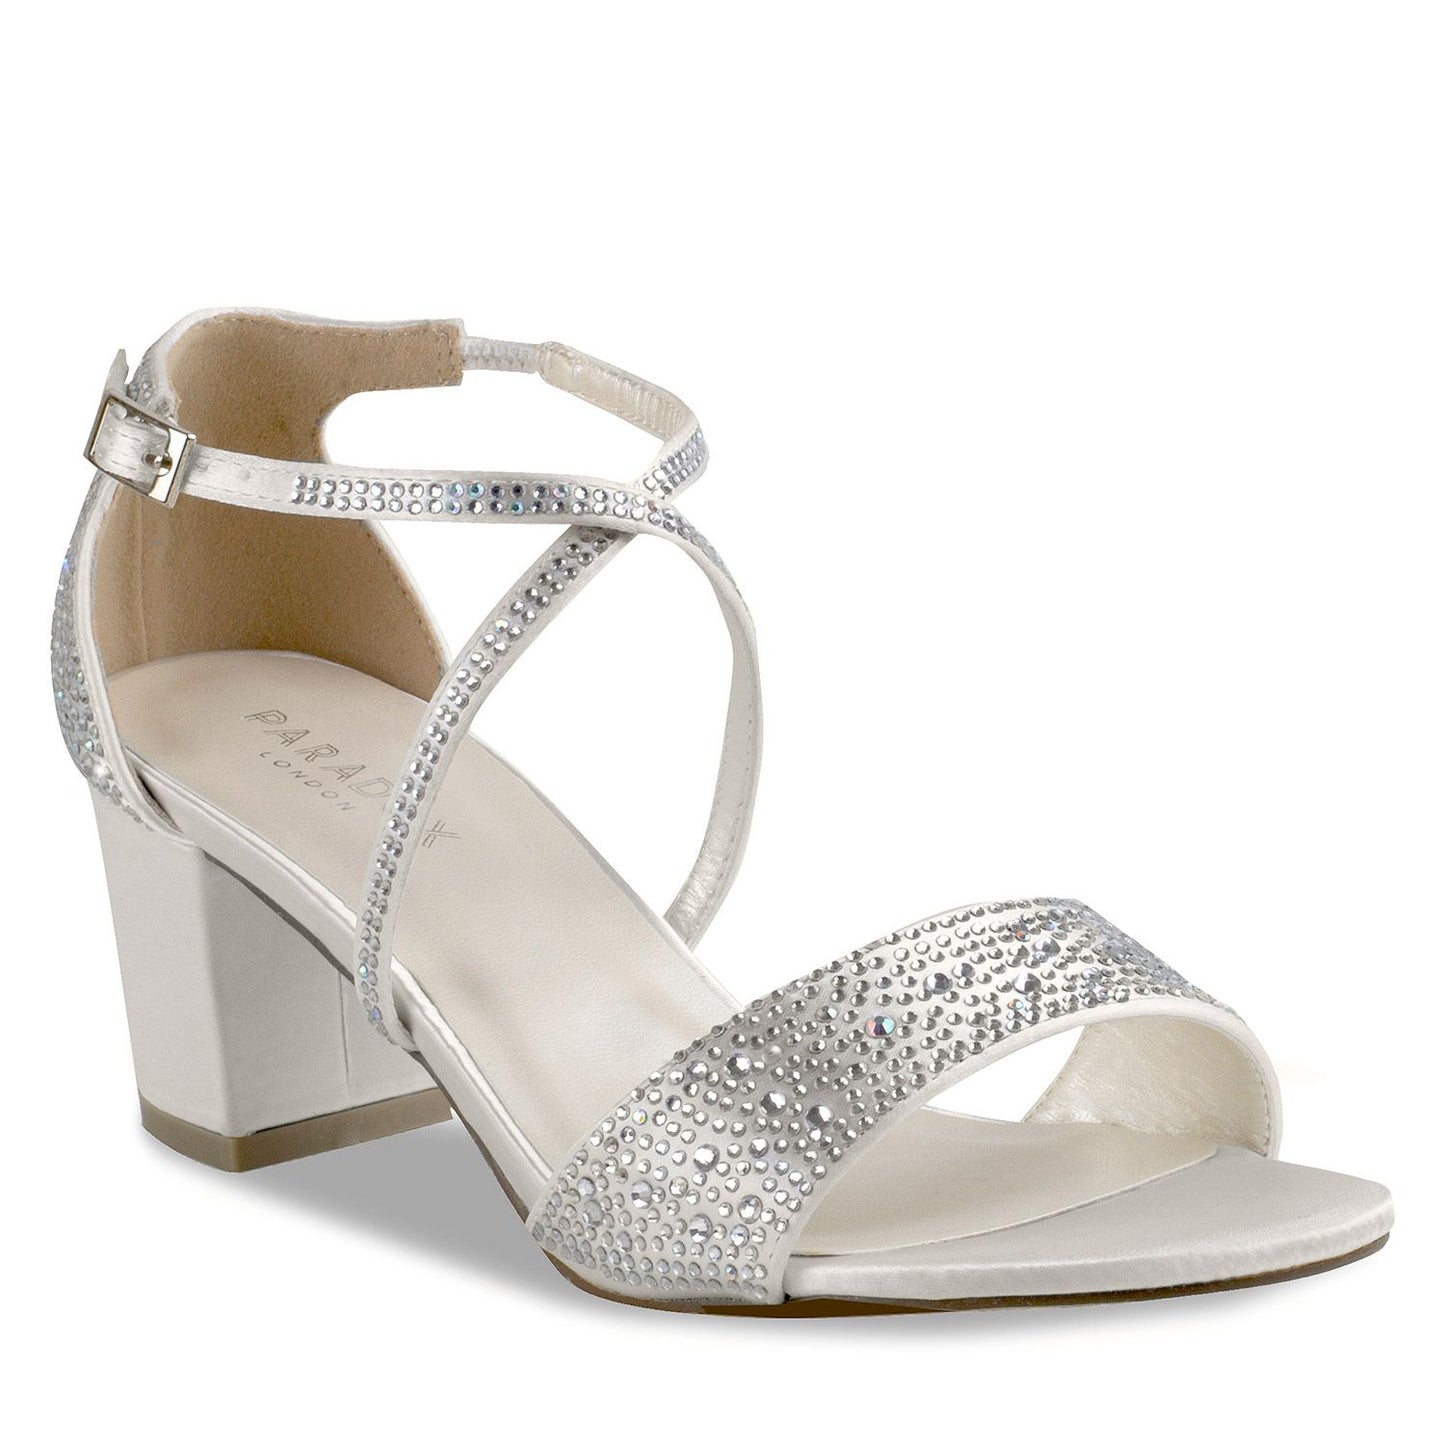 Shimmer shoe with 2 inch block heel and elegant stones